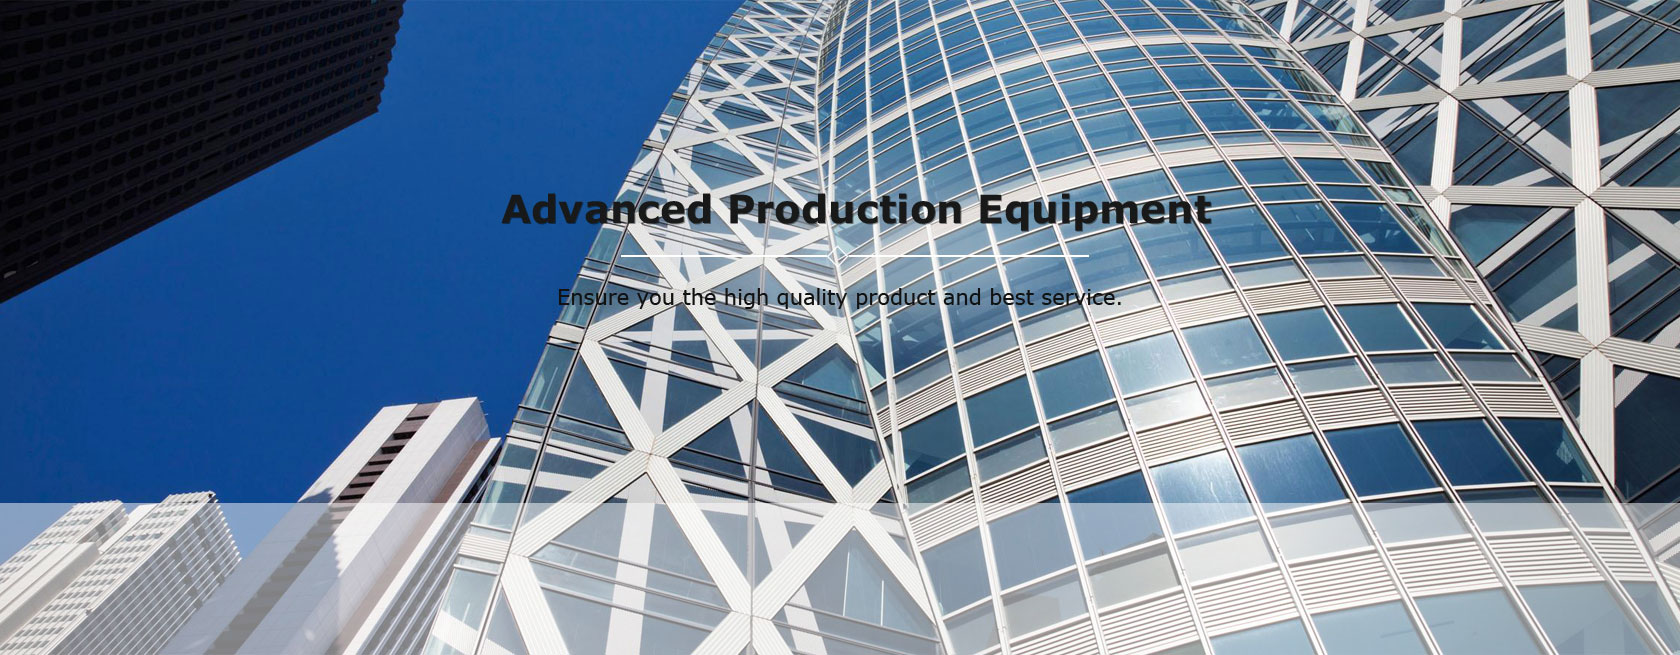 Advanced production equipment. Ensure you the high quality product and best service. 